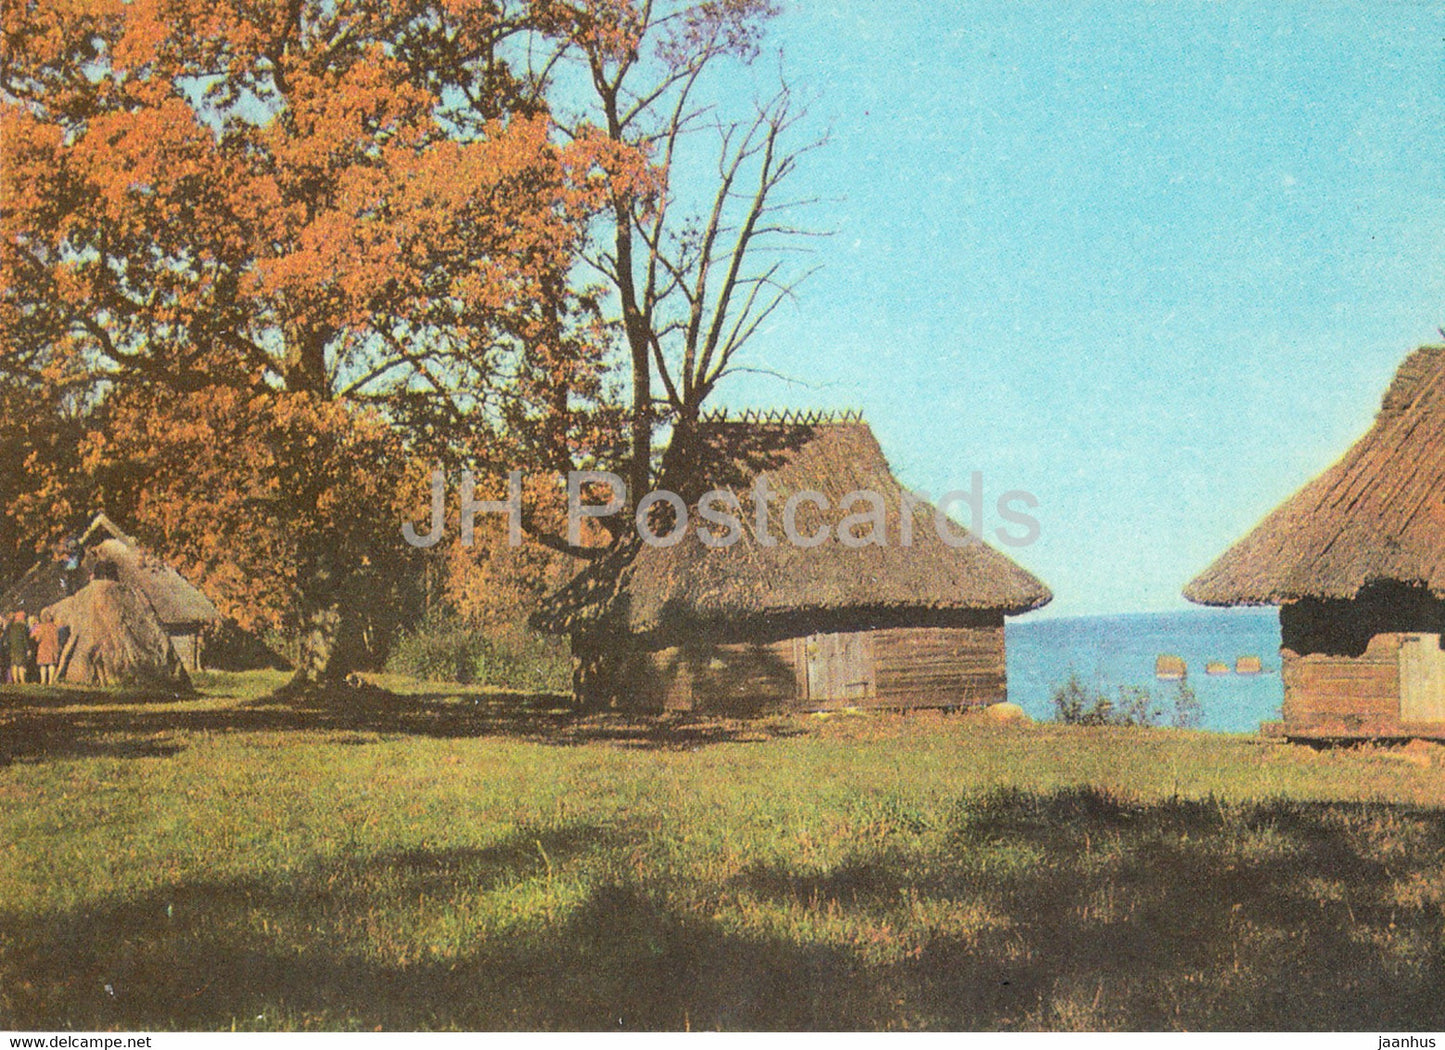 Estonian Open Air Museum - Net Sheds in the zone of the islands - 1977 - Estonia USSR - unused - JH Postcards